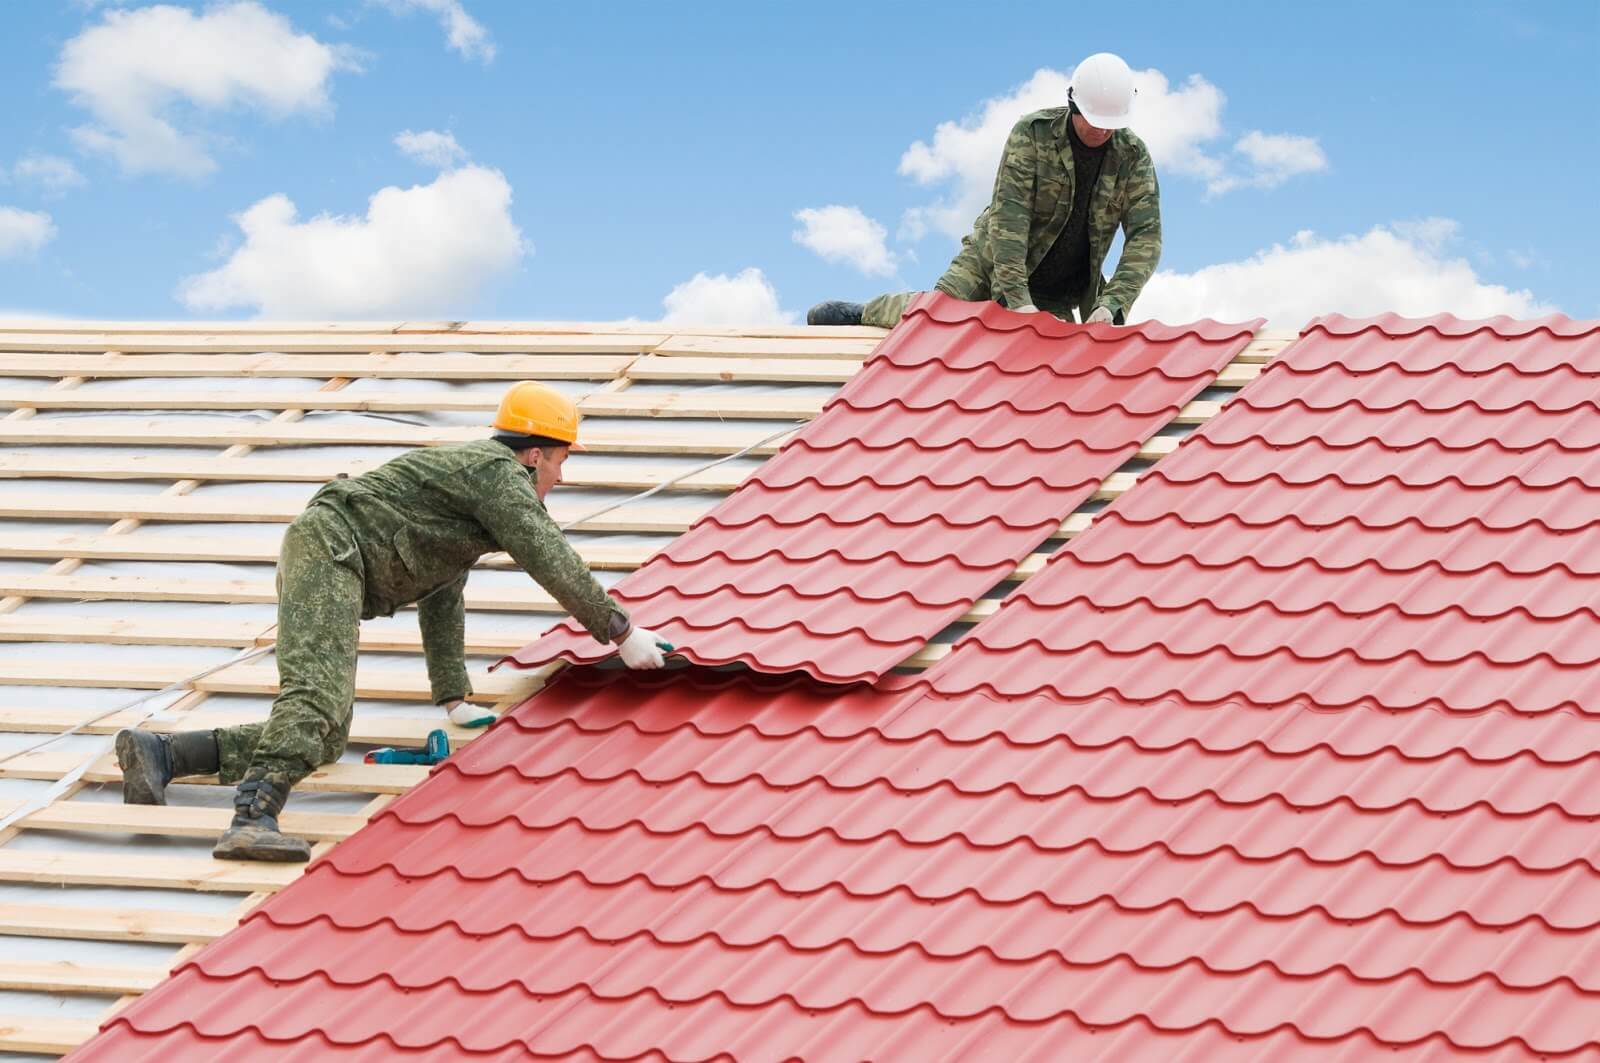 Greater Chicago Roofing - Naperville